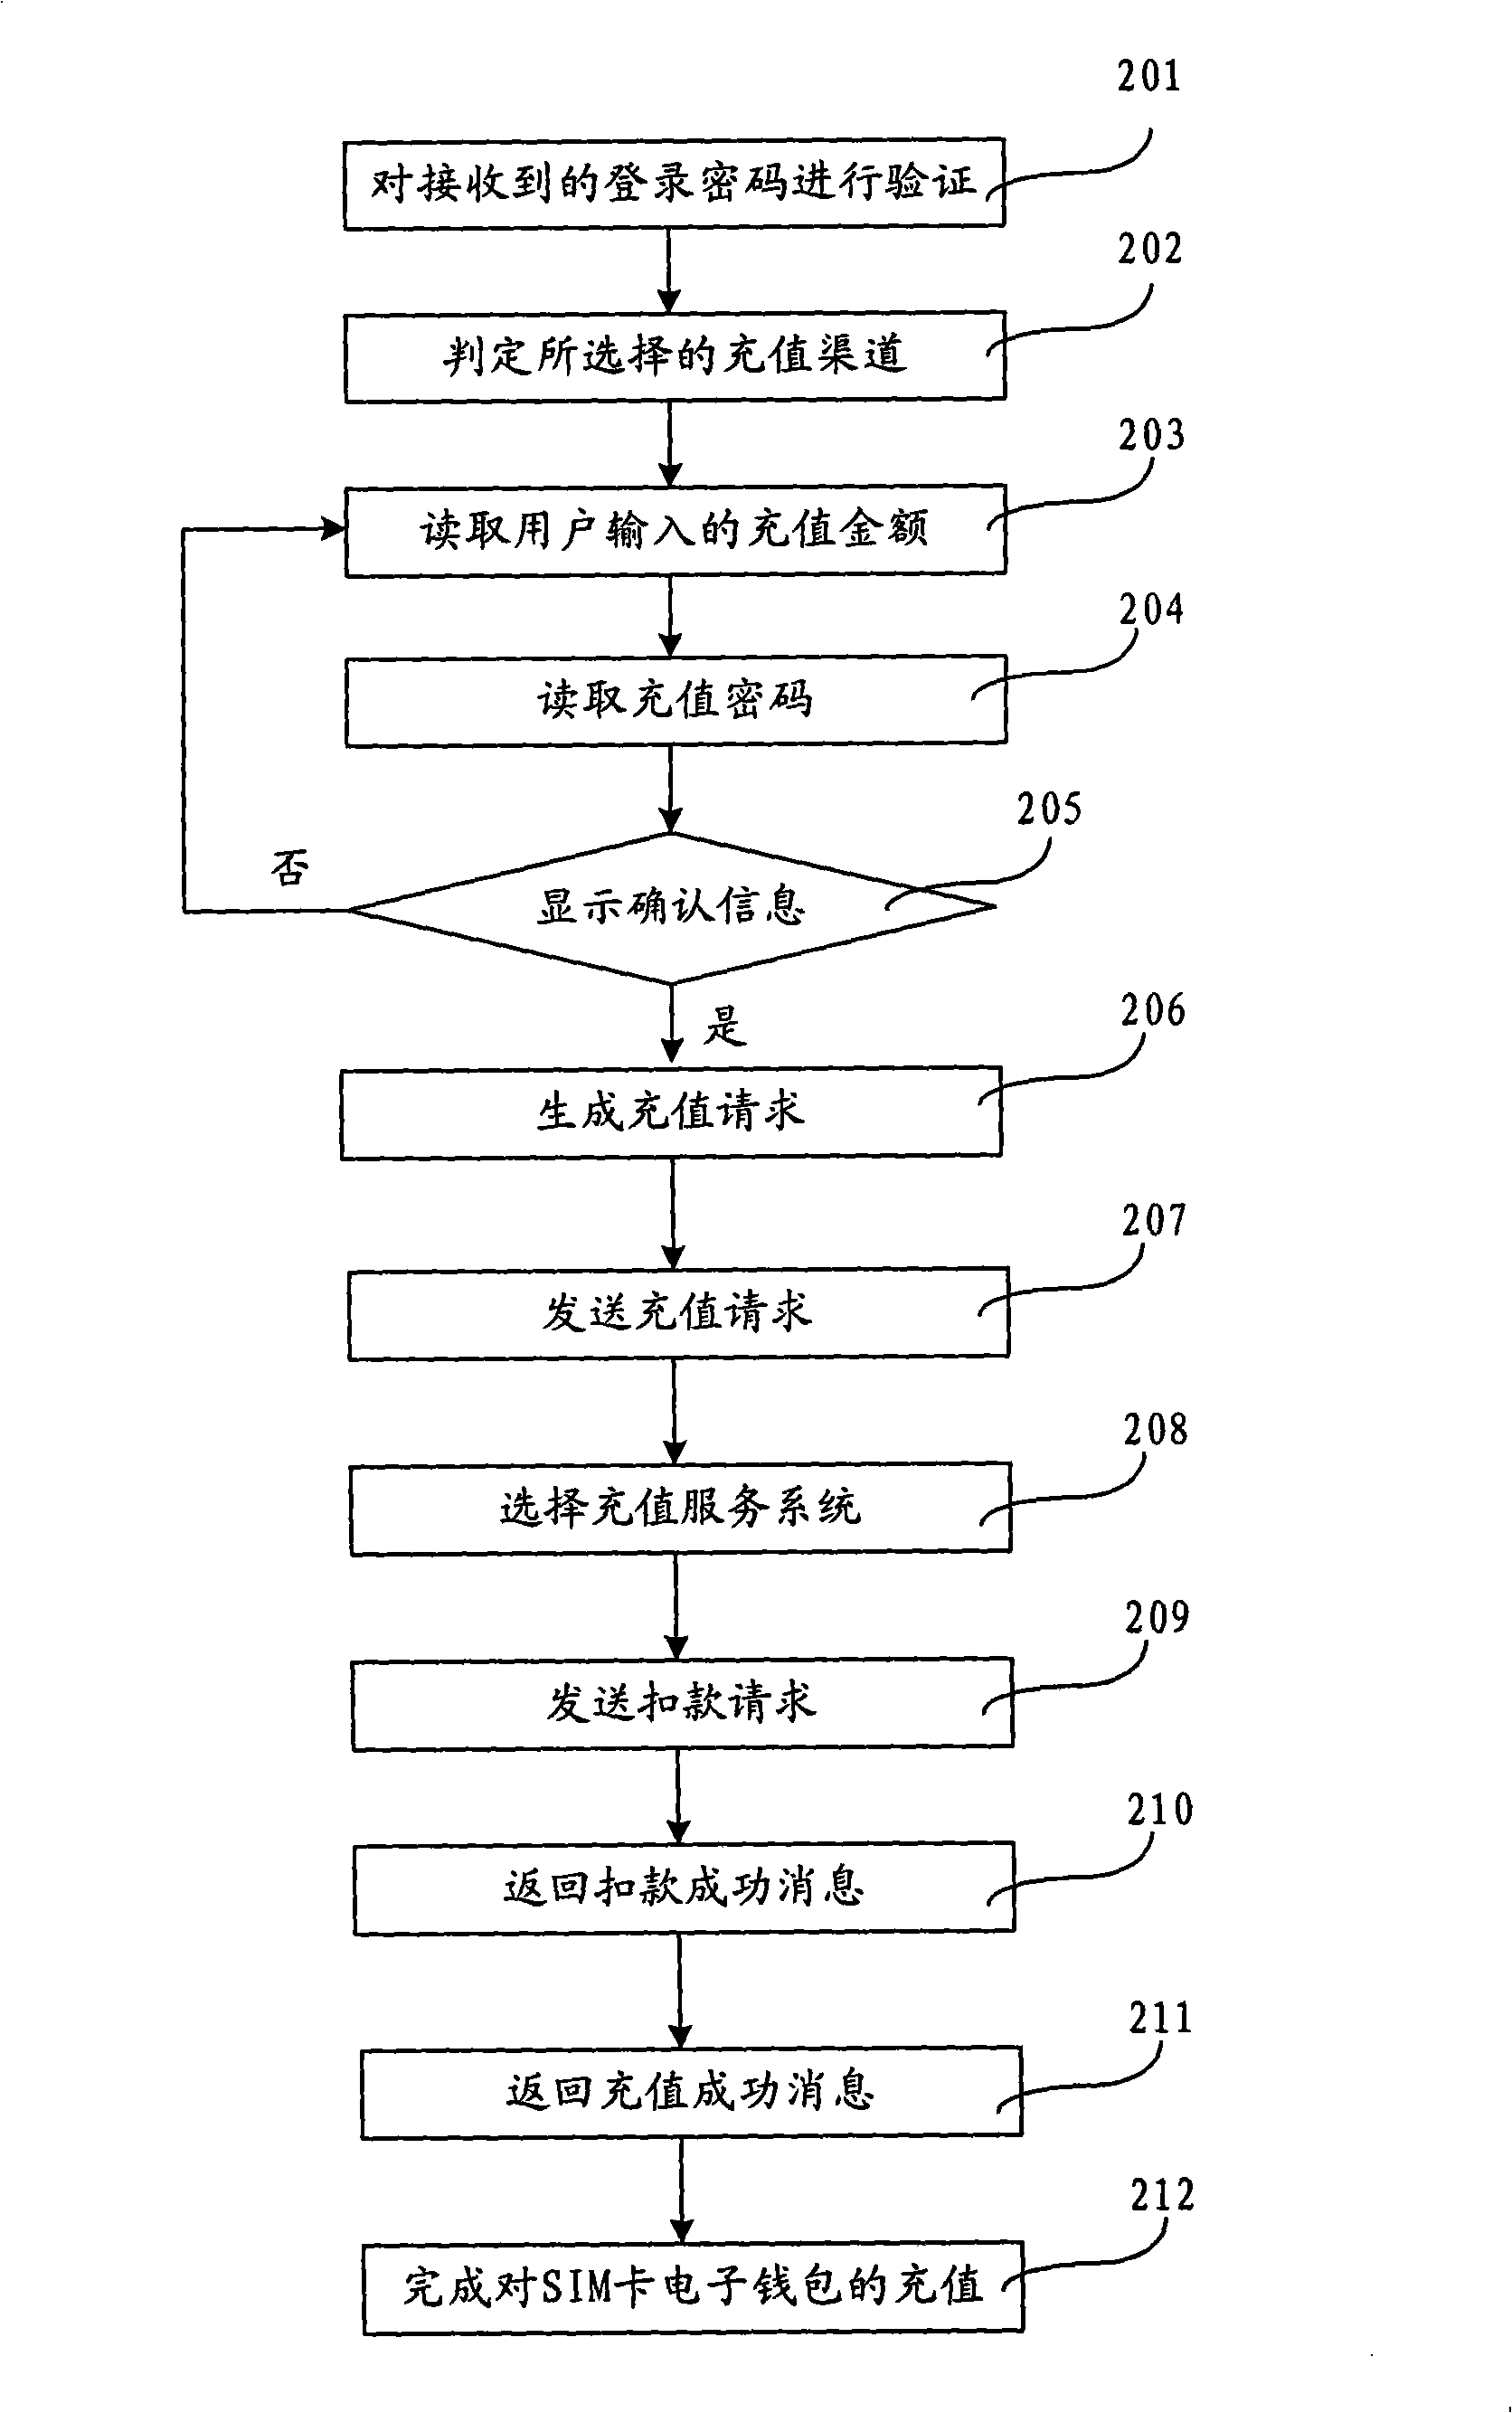 Method and system for processing electric currency information